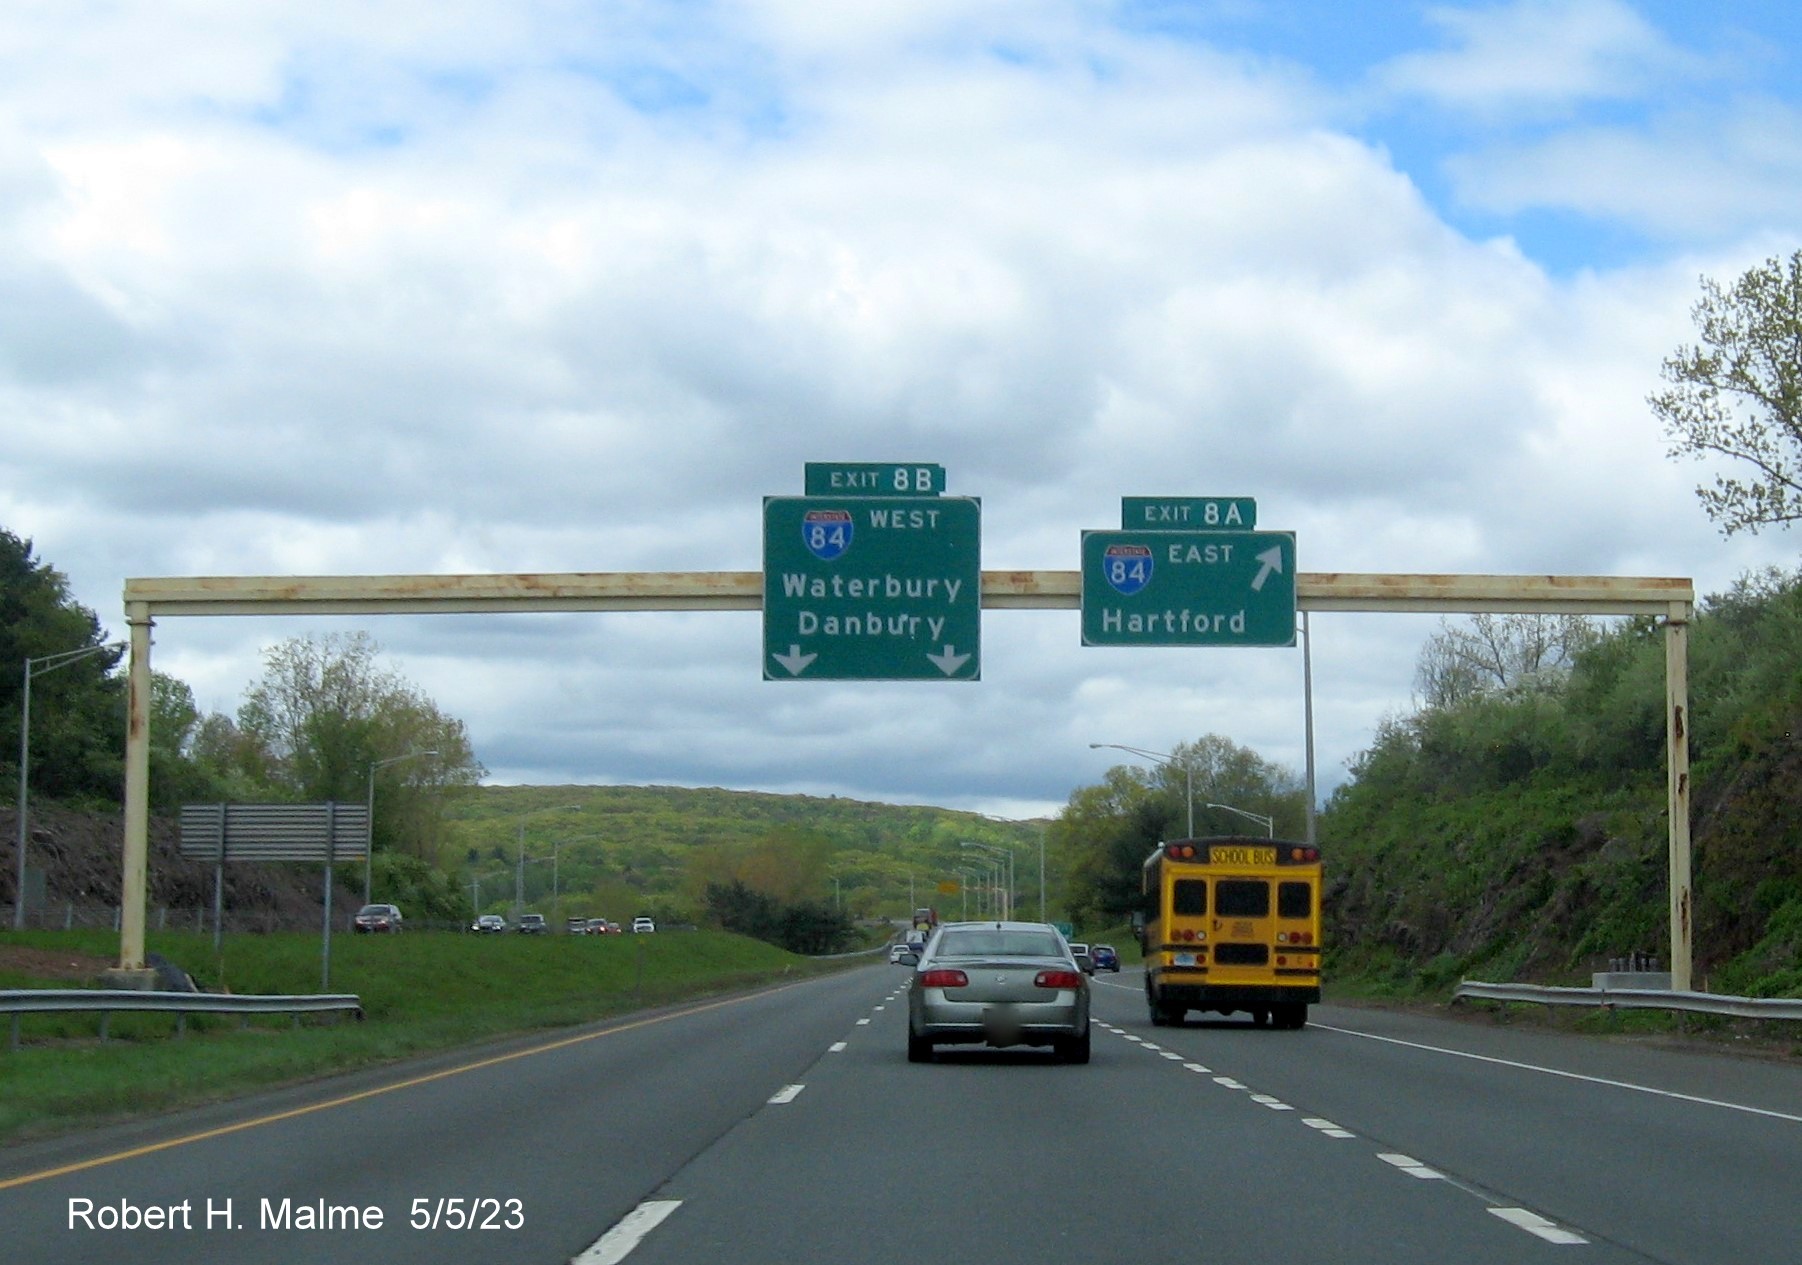 Image of overheag ramp sign for I-84 East exit with new milepost based exit number on I-691 West in Cheshire, May 2023